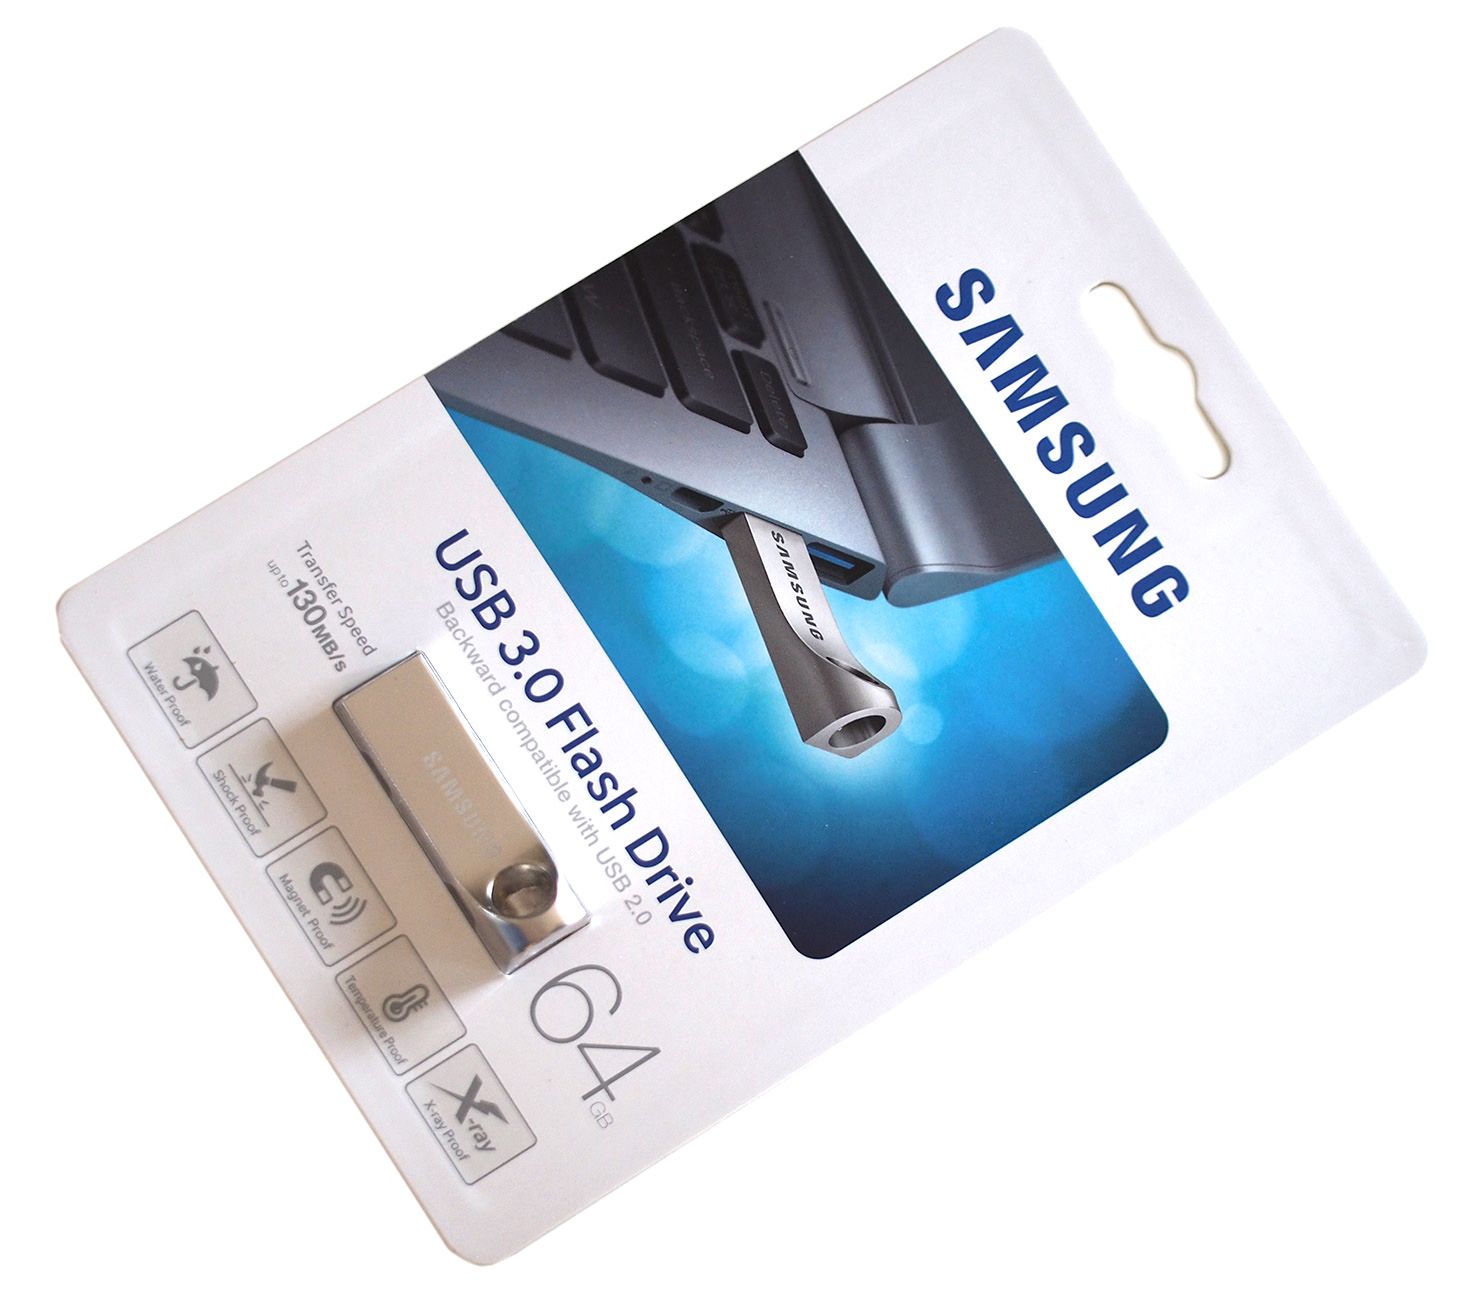 Highres Samsung 3 0 USB Drive 64gb Packaging 1441887933